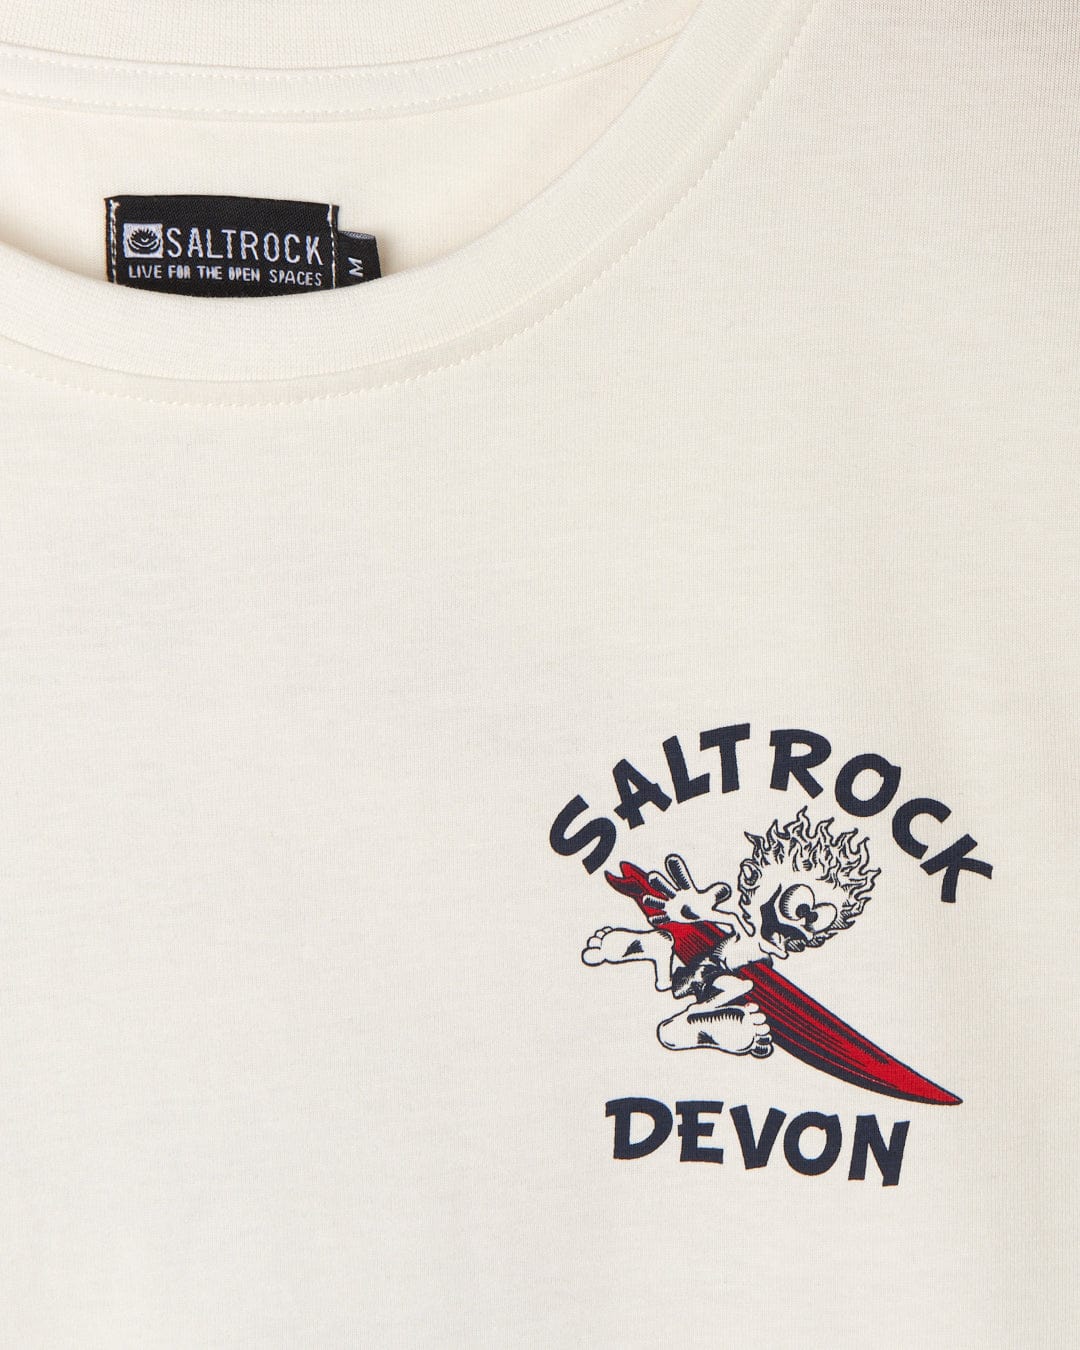 A Wave Rider Devon - Mens Short Sleeve T-Shirt - White with the brand name Saltrock on it.